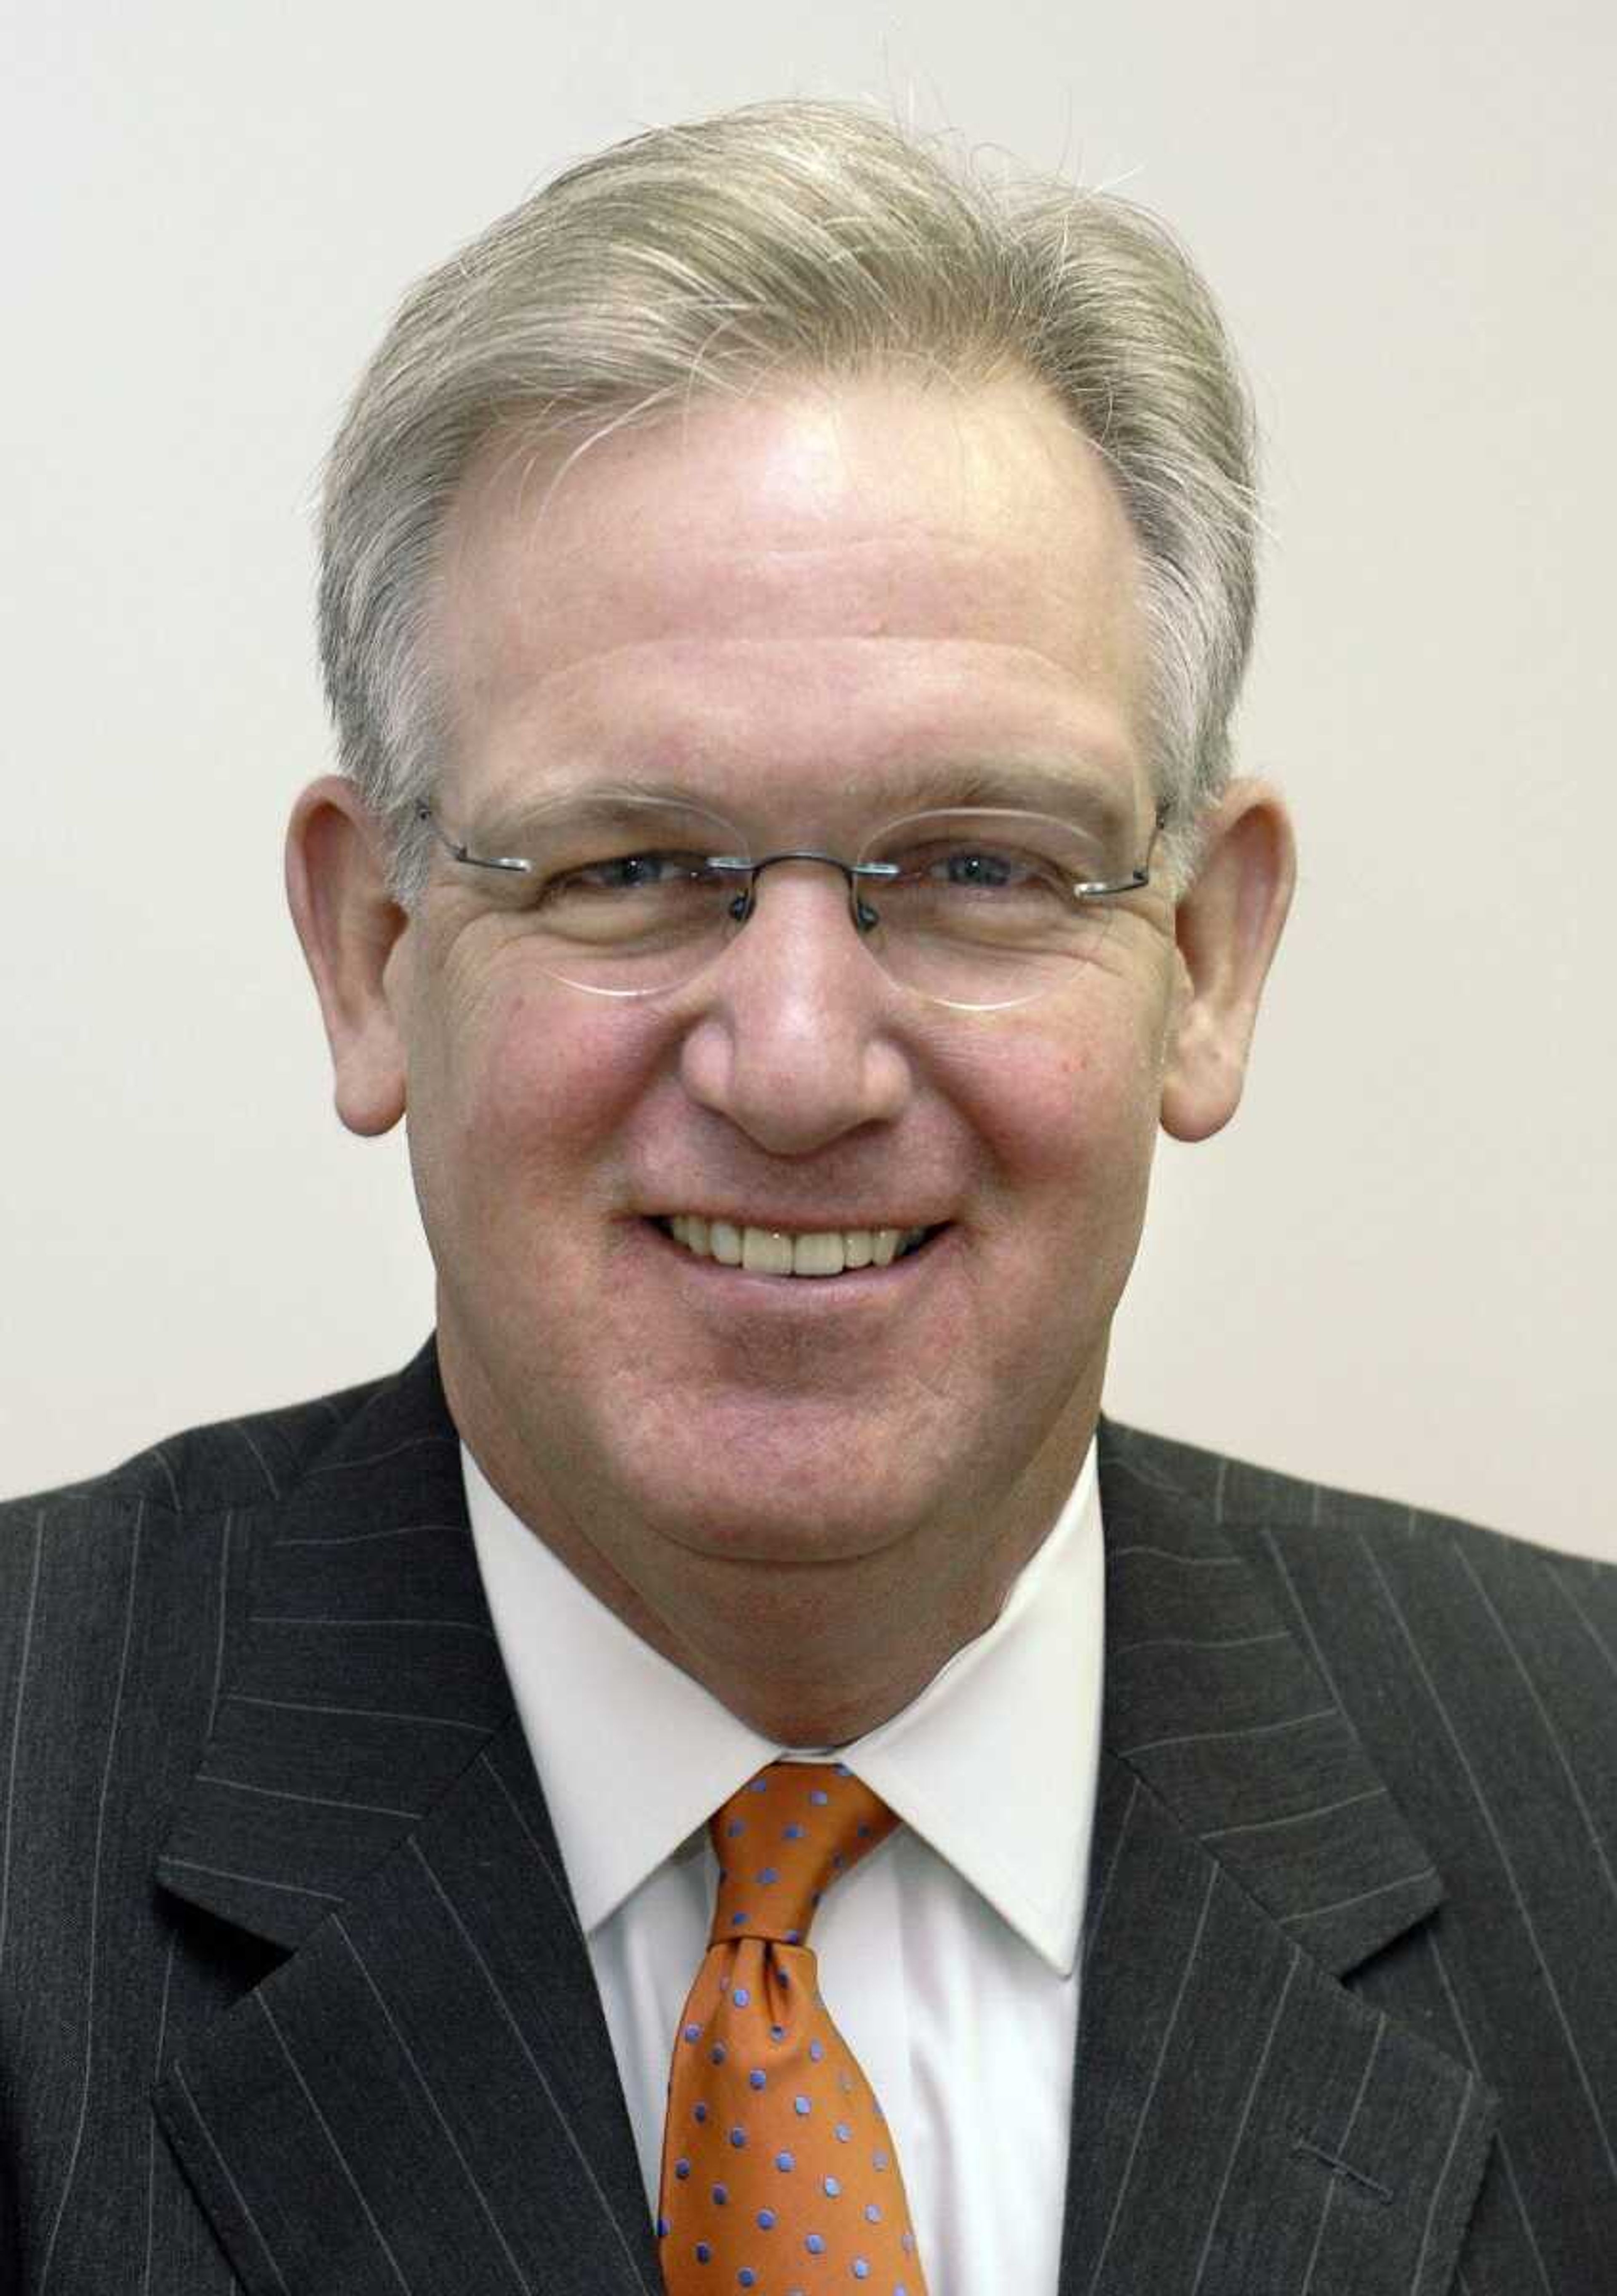 Jay Nixon will speak at commencement. - Southeast Missourian photo